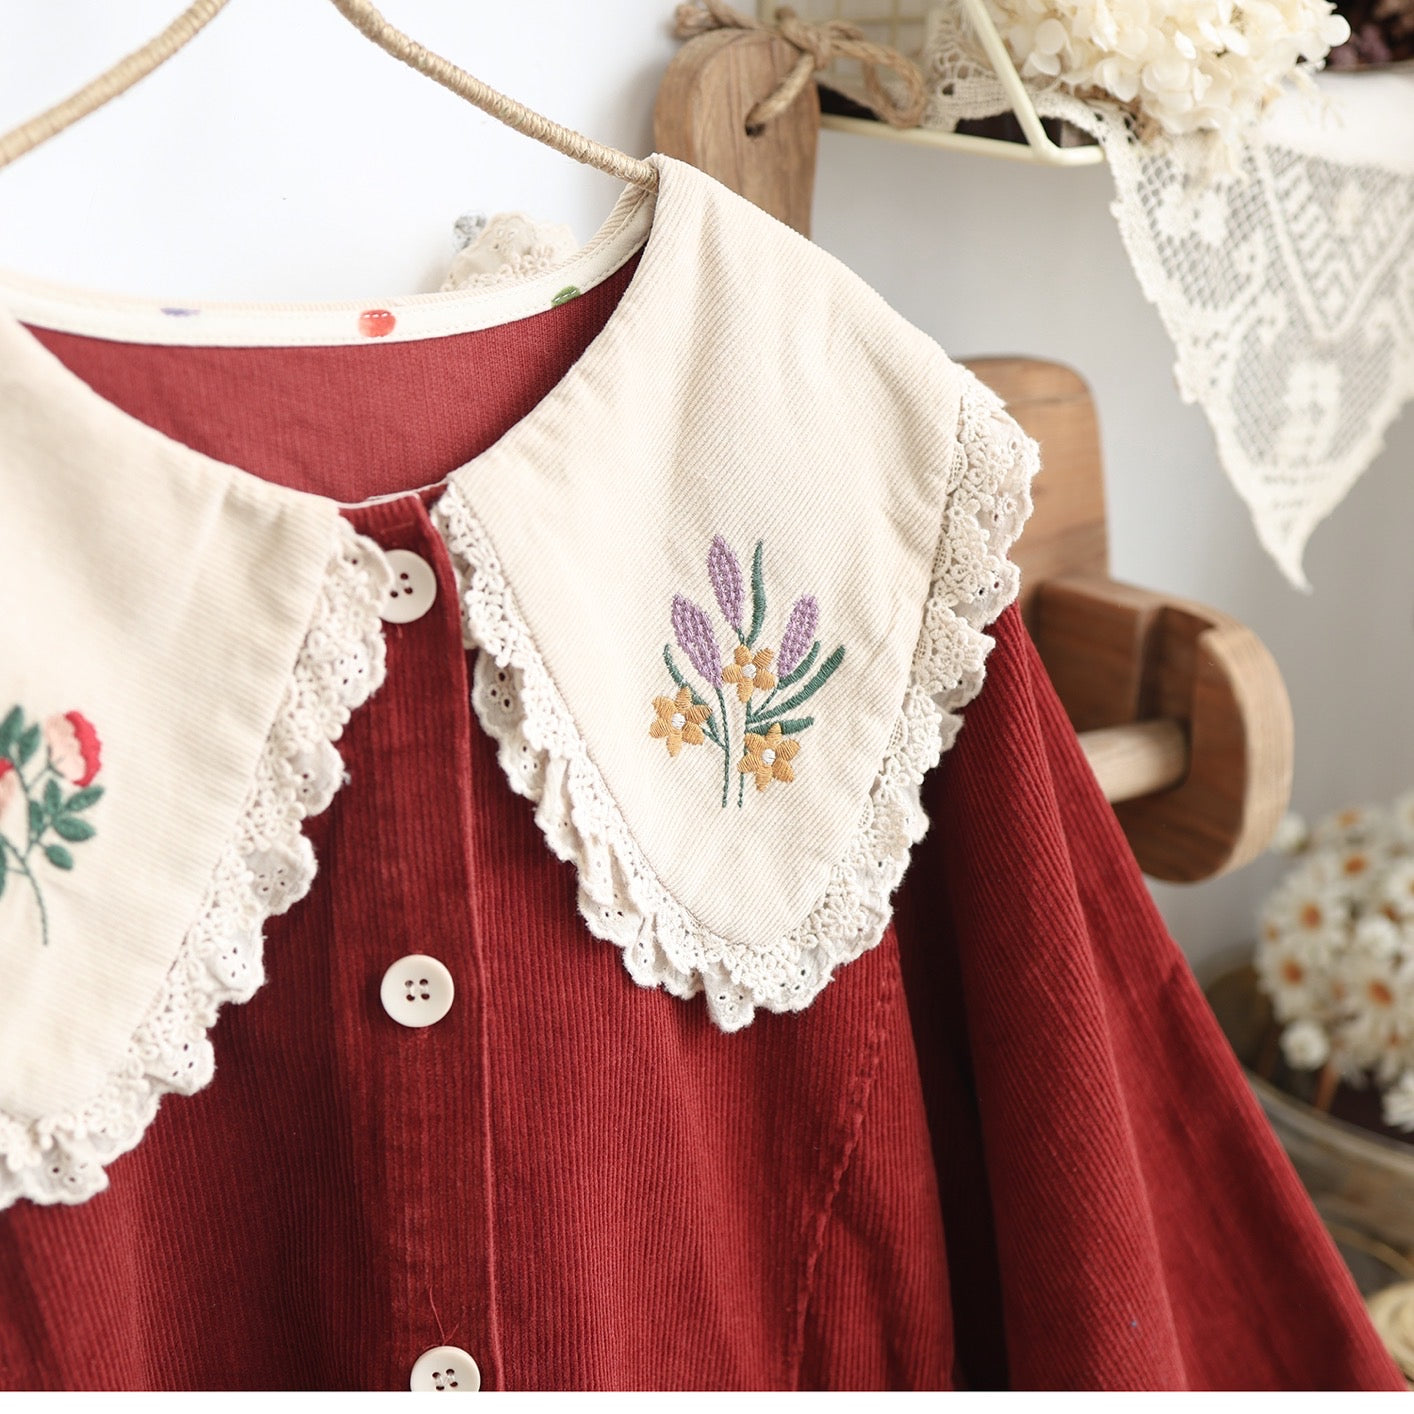 In a Faraway Land Flower Embroidered Corduroy Cottagecore Dress